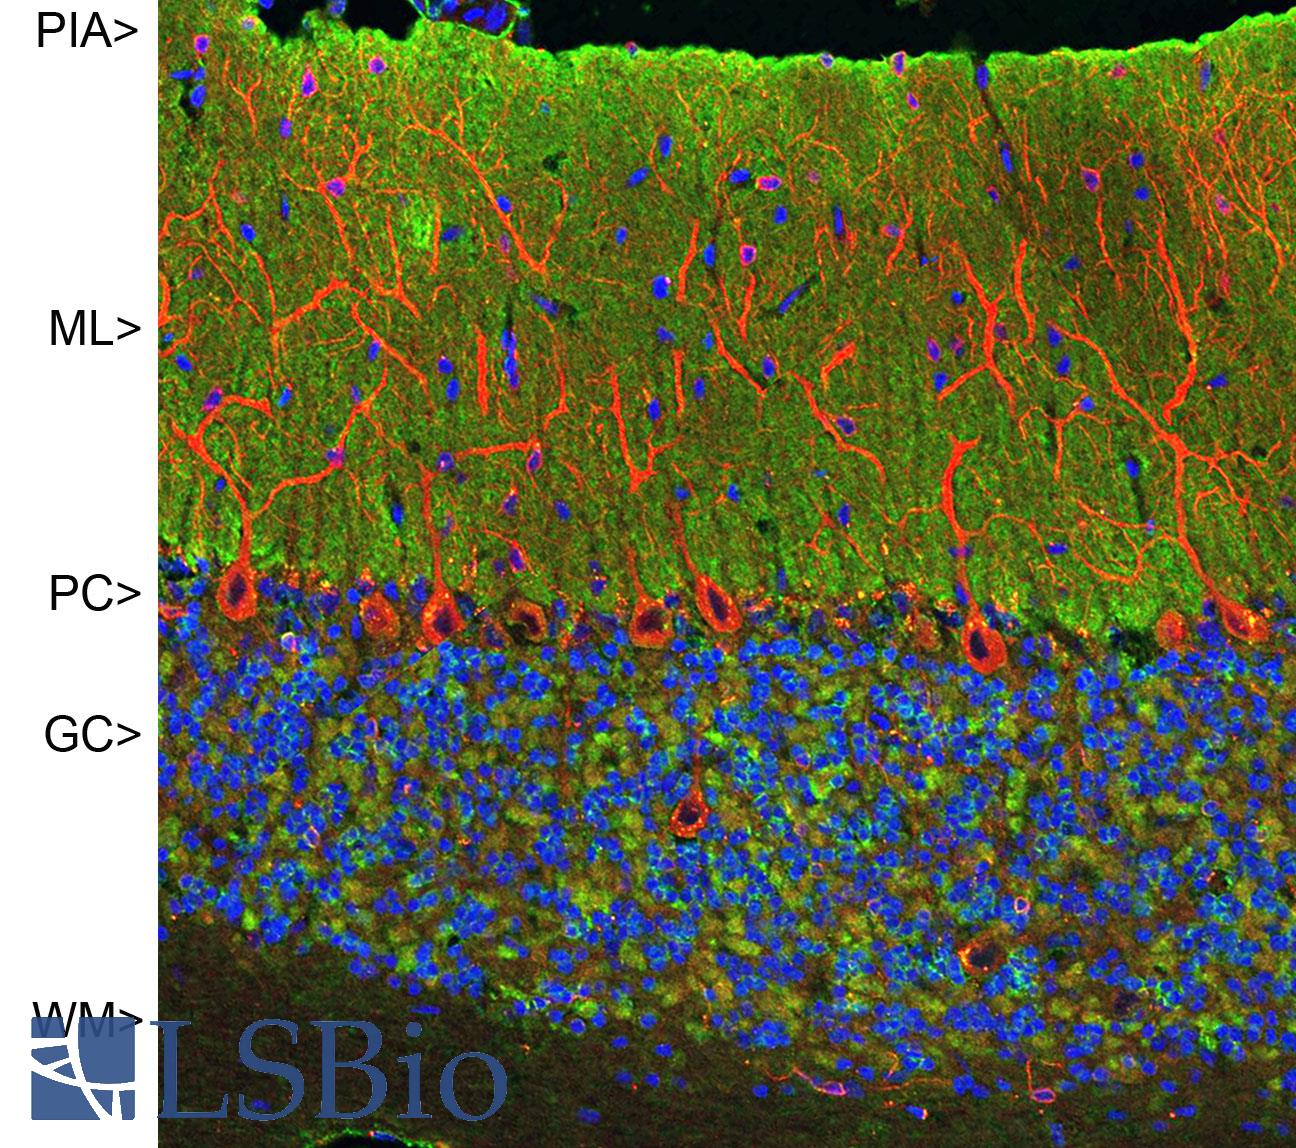 VILIP / VSNL1 Antibody - Confocal image of adult rat cerebellar cortex stained with VILIP / VSNL1 antibody (green), chicken polyclonal antibody to MAP2 (red) and DNA (blue). The VILIP / VSNL1 antibody antibody reveals synapses in the molecular layer (ML) strongly. Synaptic regions are also seen in the granule cell layer (GC). The perikarya of Purkinje cells (PC) are revealed with MAP2 antibody (4). Little staining is seen in the white matter (WM).